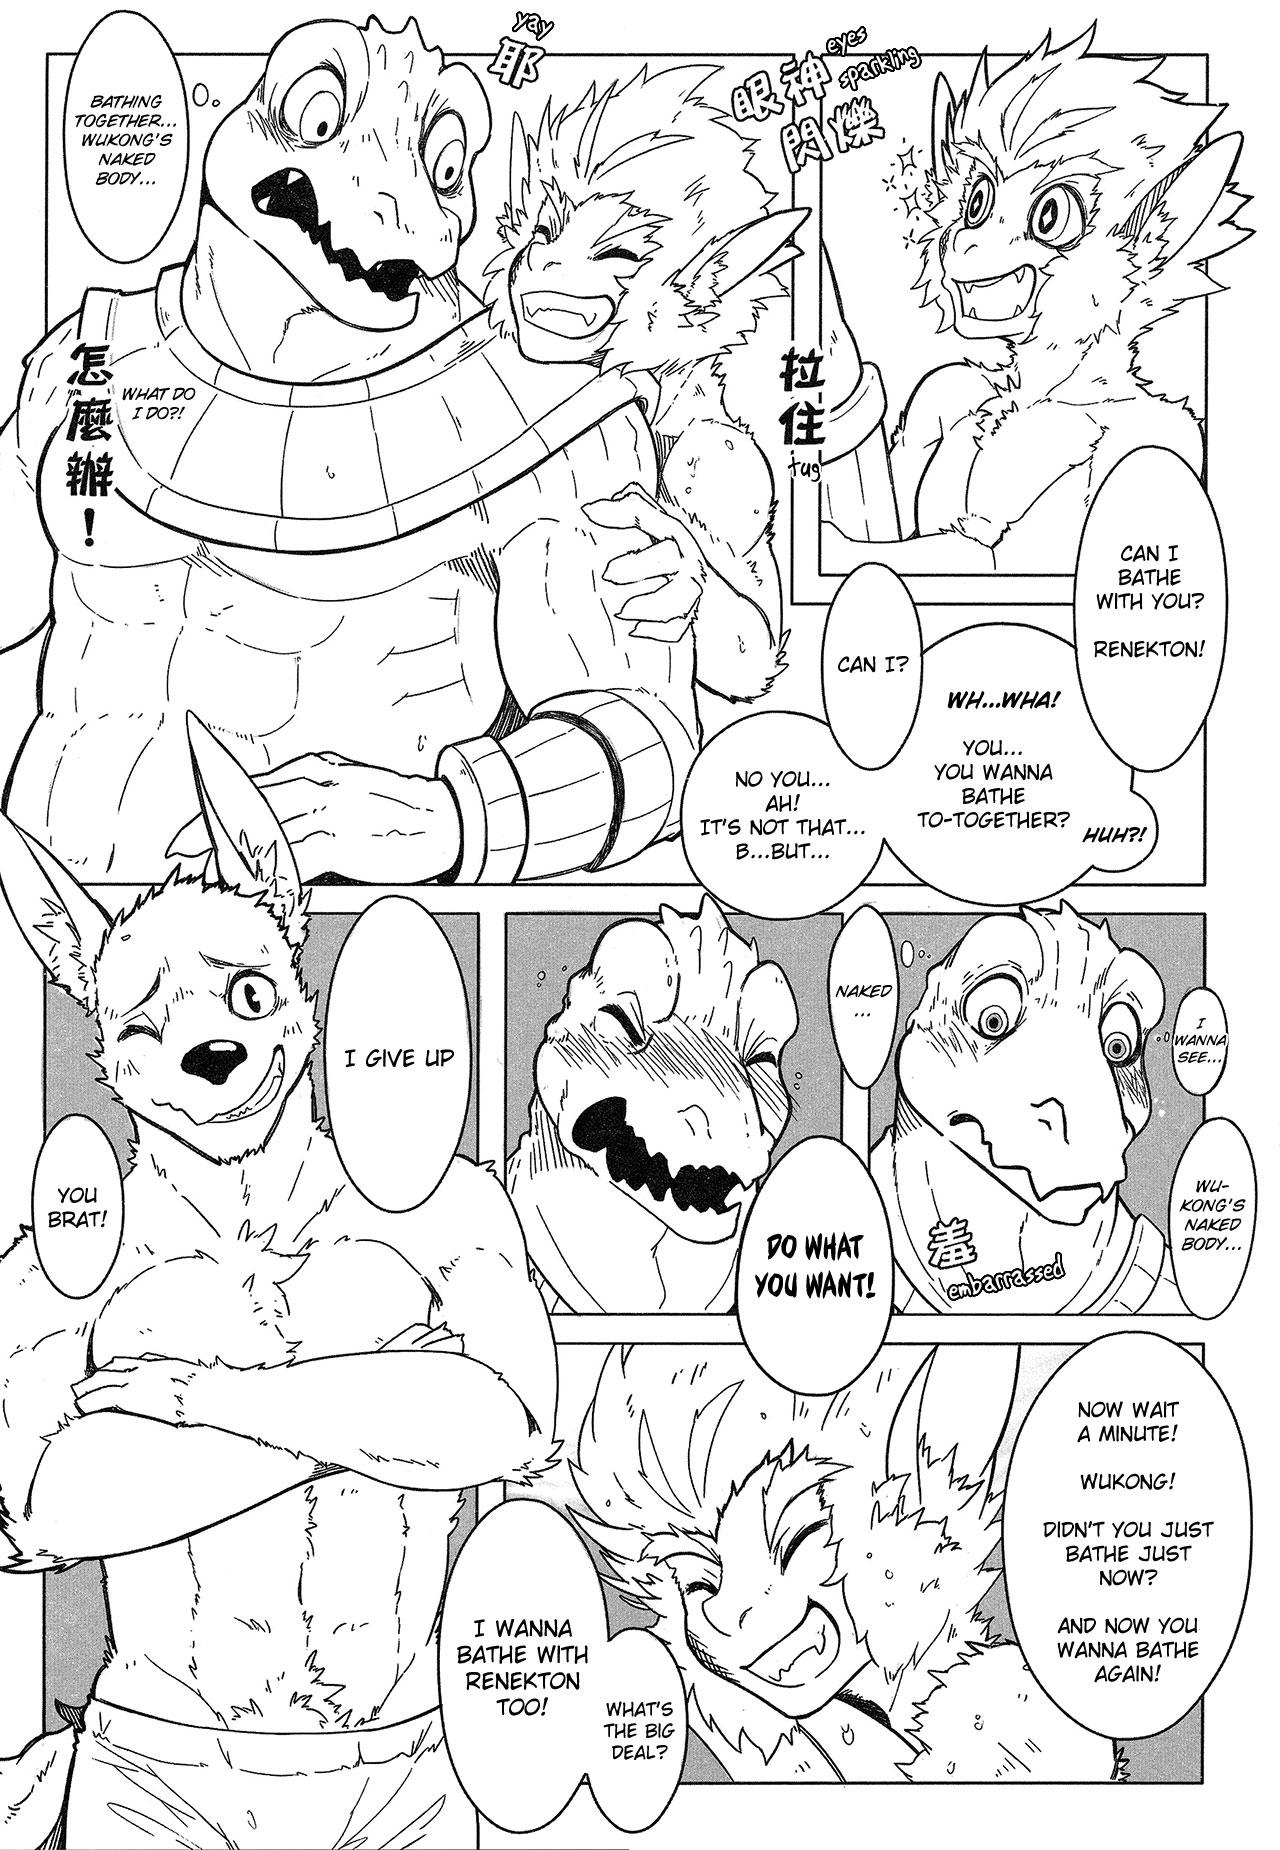 Free Fucking Rebel Hero 2 - League of legends Gay - Page 8